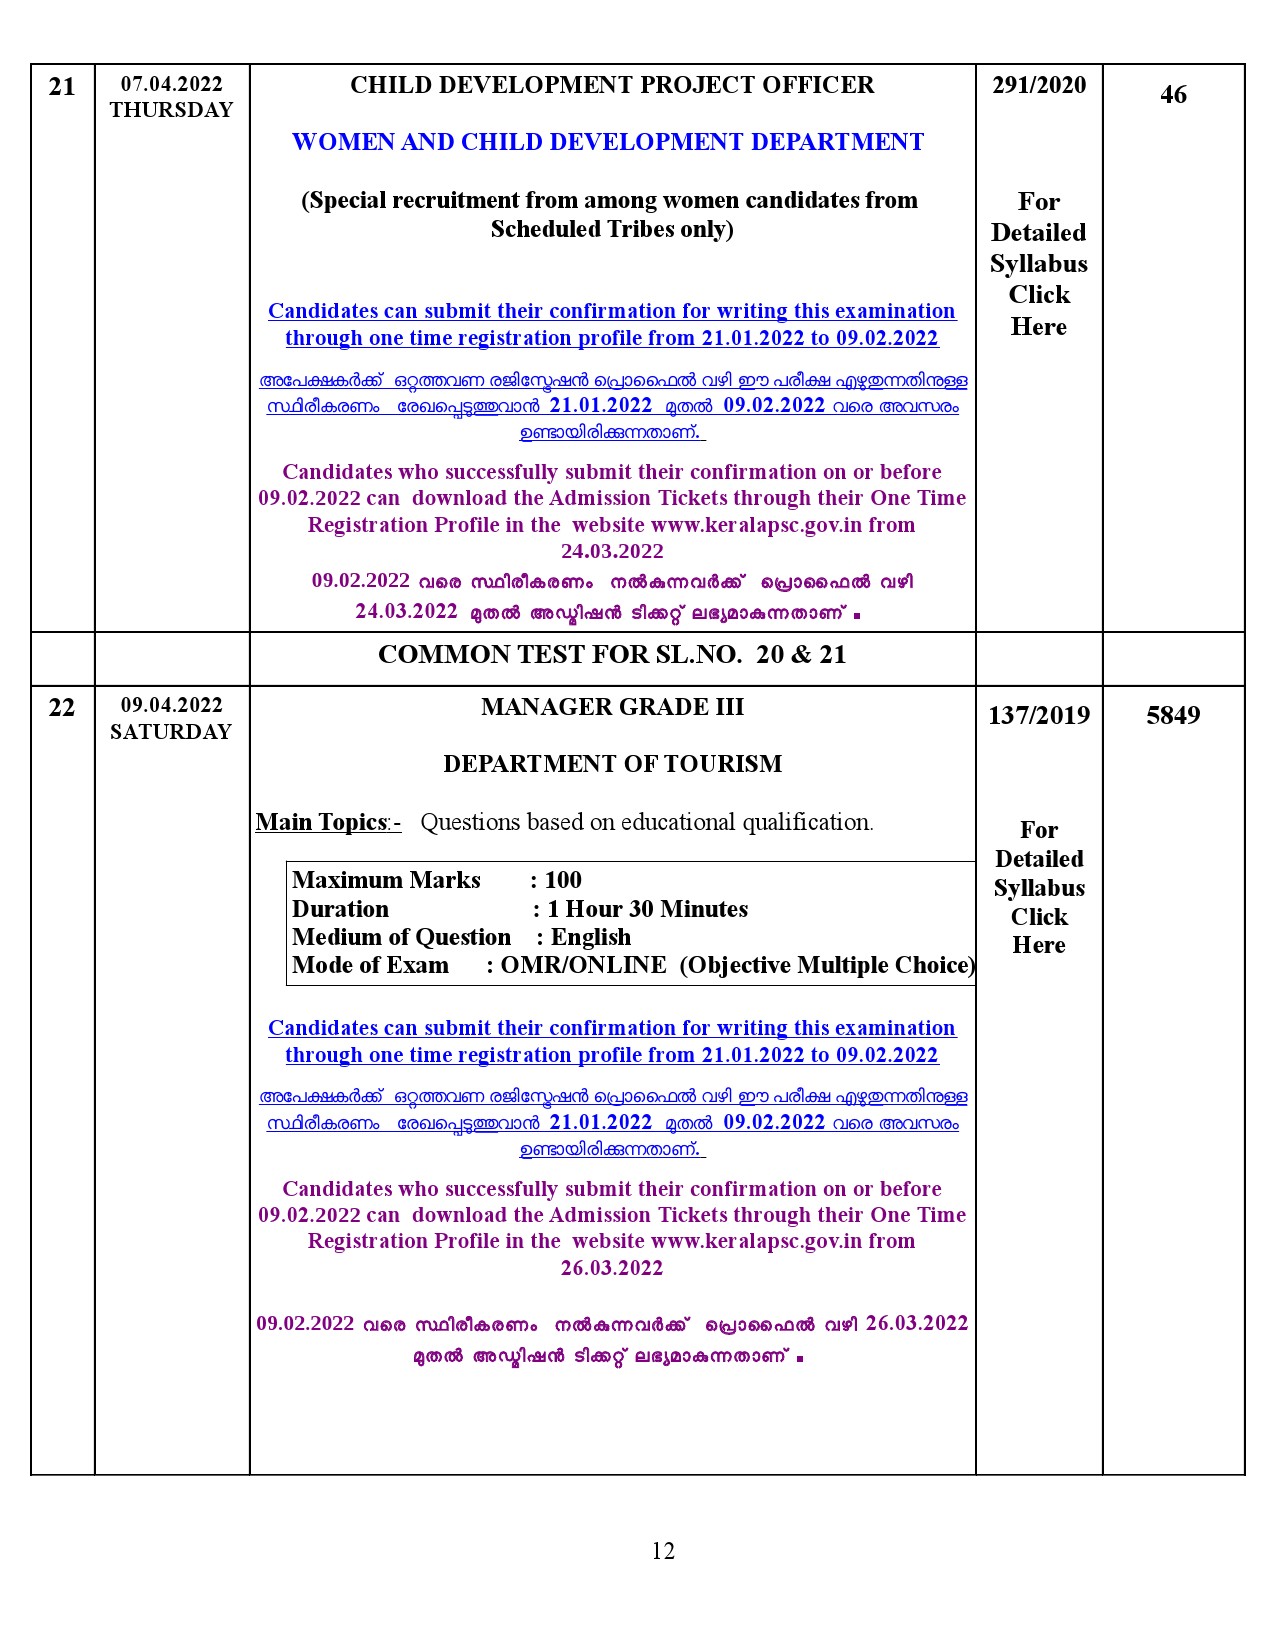 Examination Programme For The Month Of April 2022 - Notification Image 12